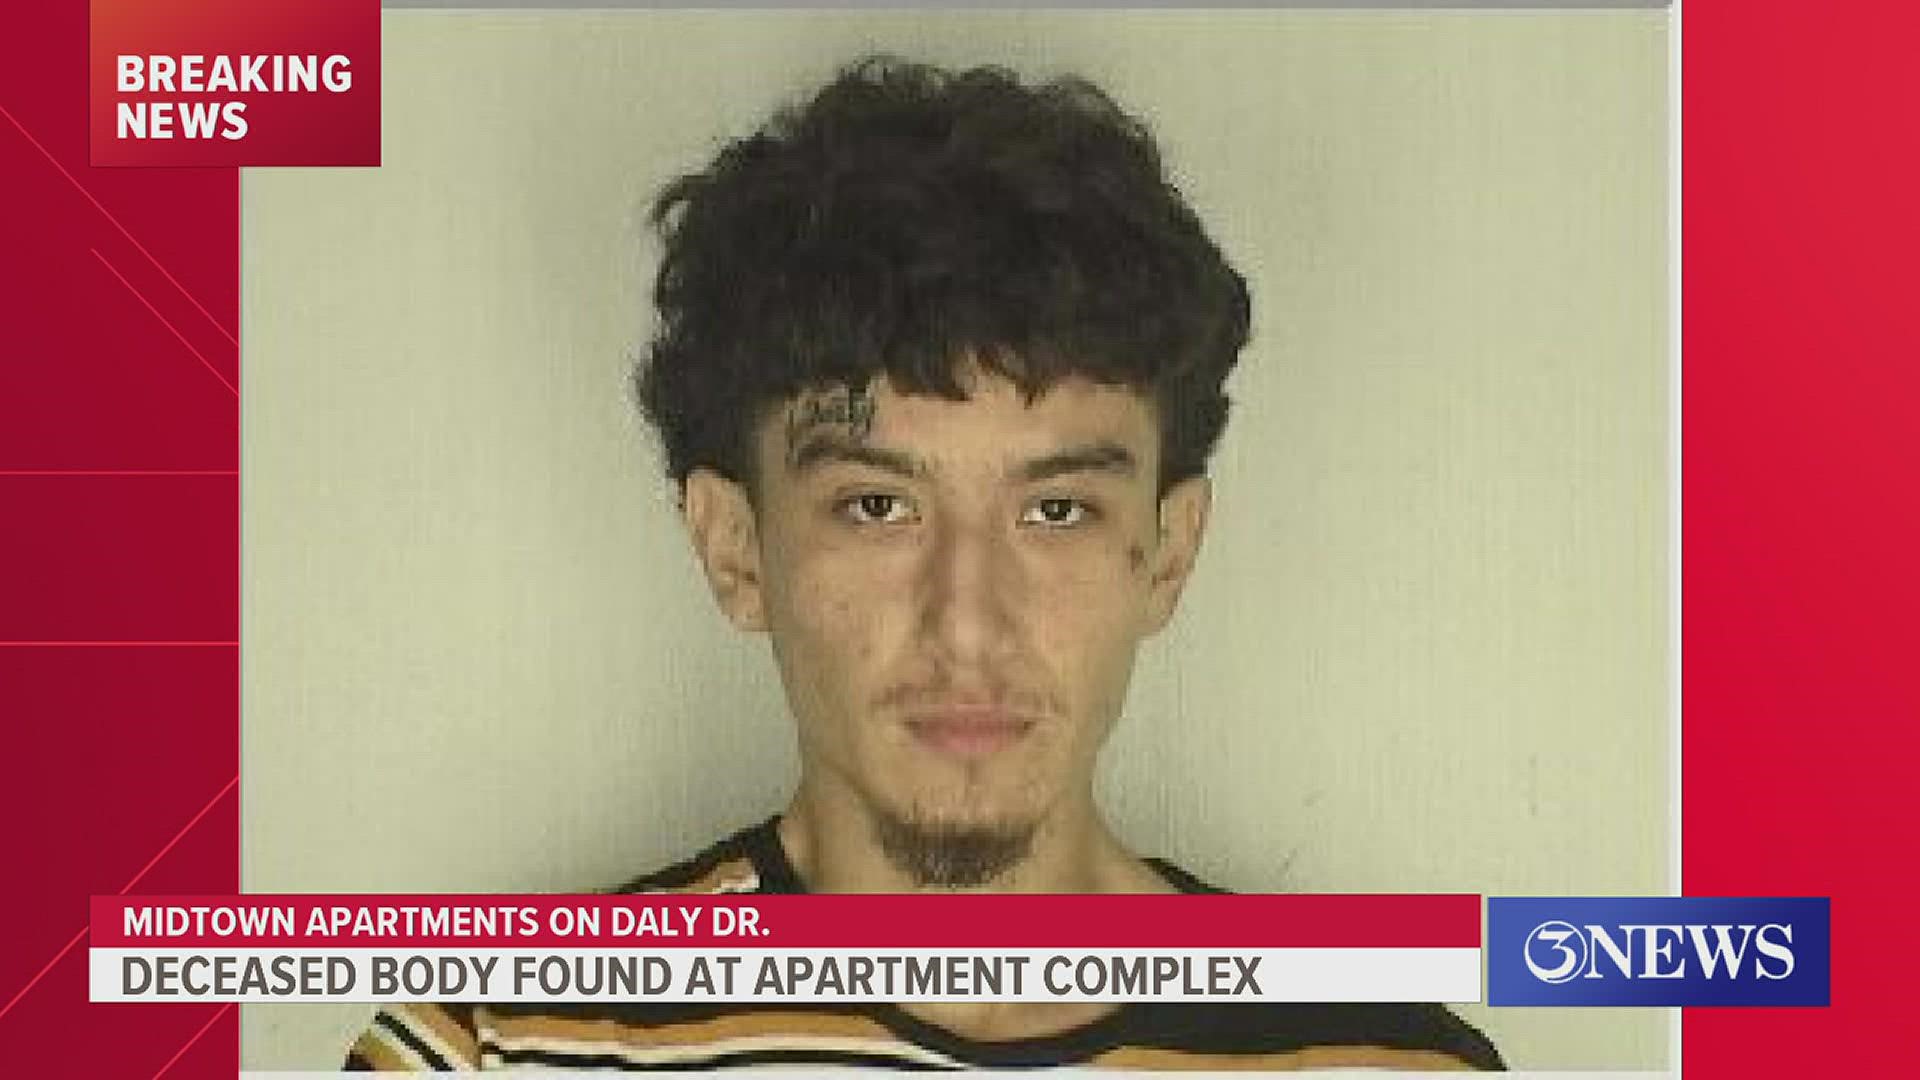 Corpus Christi Police found another 18-year-old man dead inside an apartment Monday morning. They later arrested Andrew Lugo.